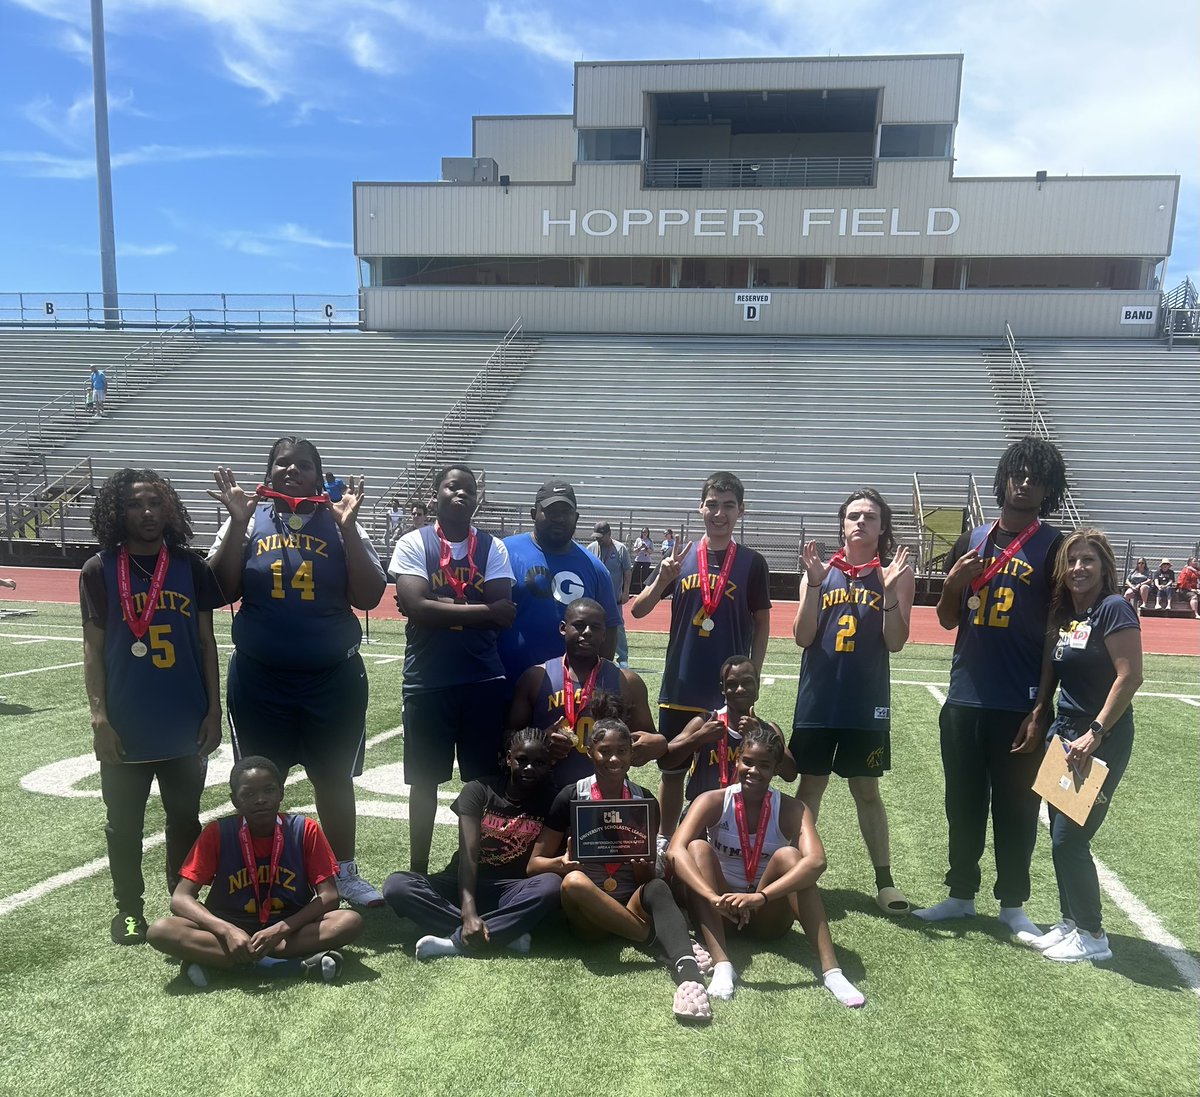 Huge congrats to Nimitz Unified UIL track team for clinching 1st place in Area 4!🥇Kudos to MacArthur for securing 2nd place!🥈Excited to advance to Regionals together! 🌟 Prairie View A&M, here we come🏃‍♂️ #AreaChamps #RoadToRegionals